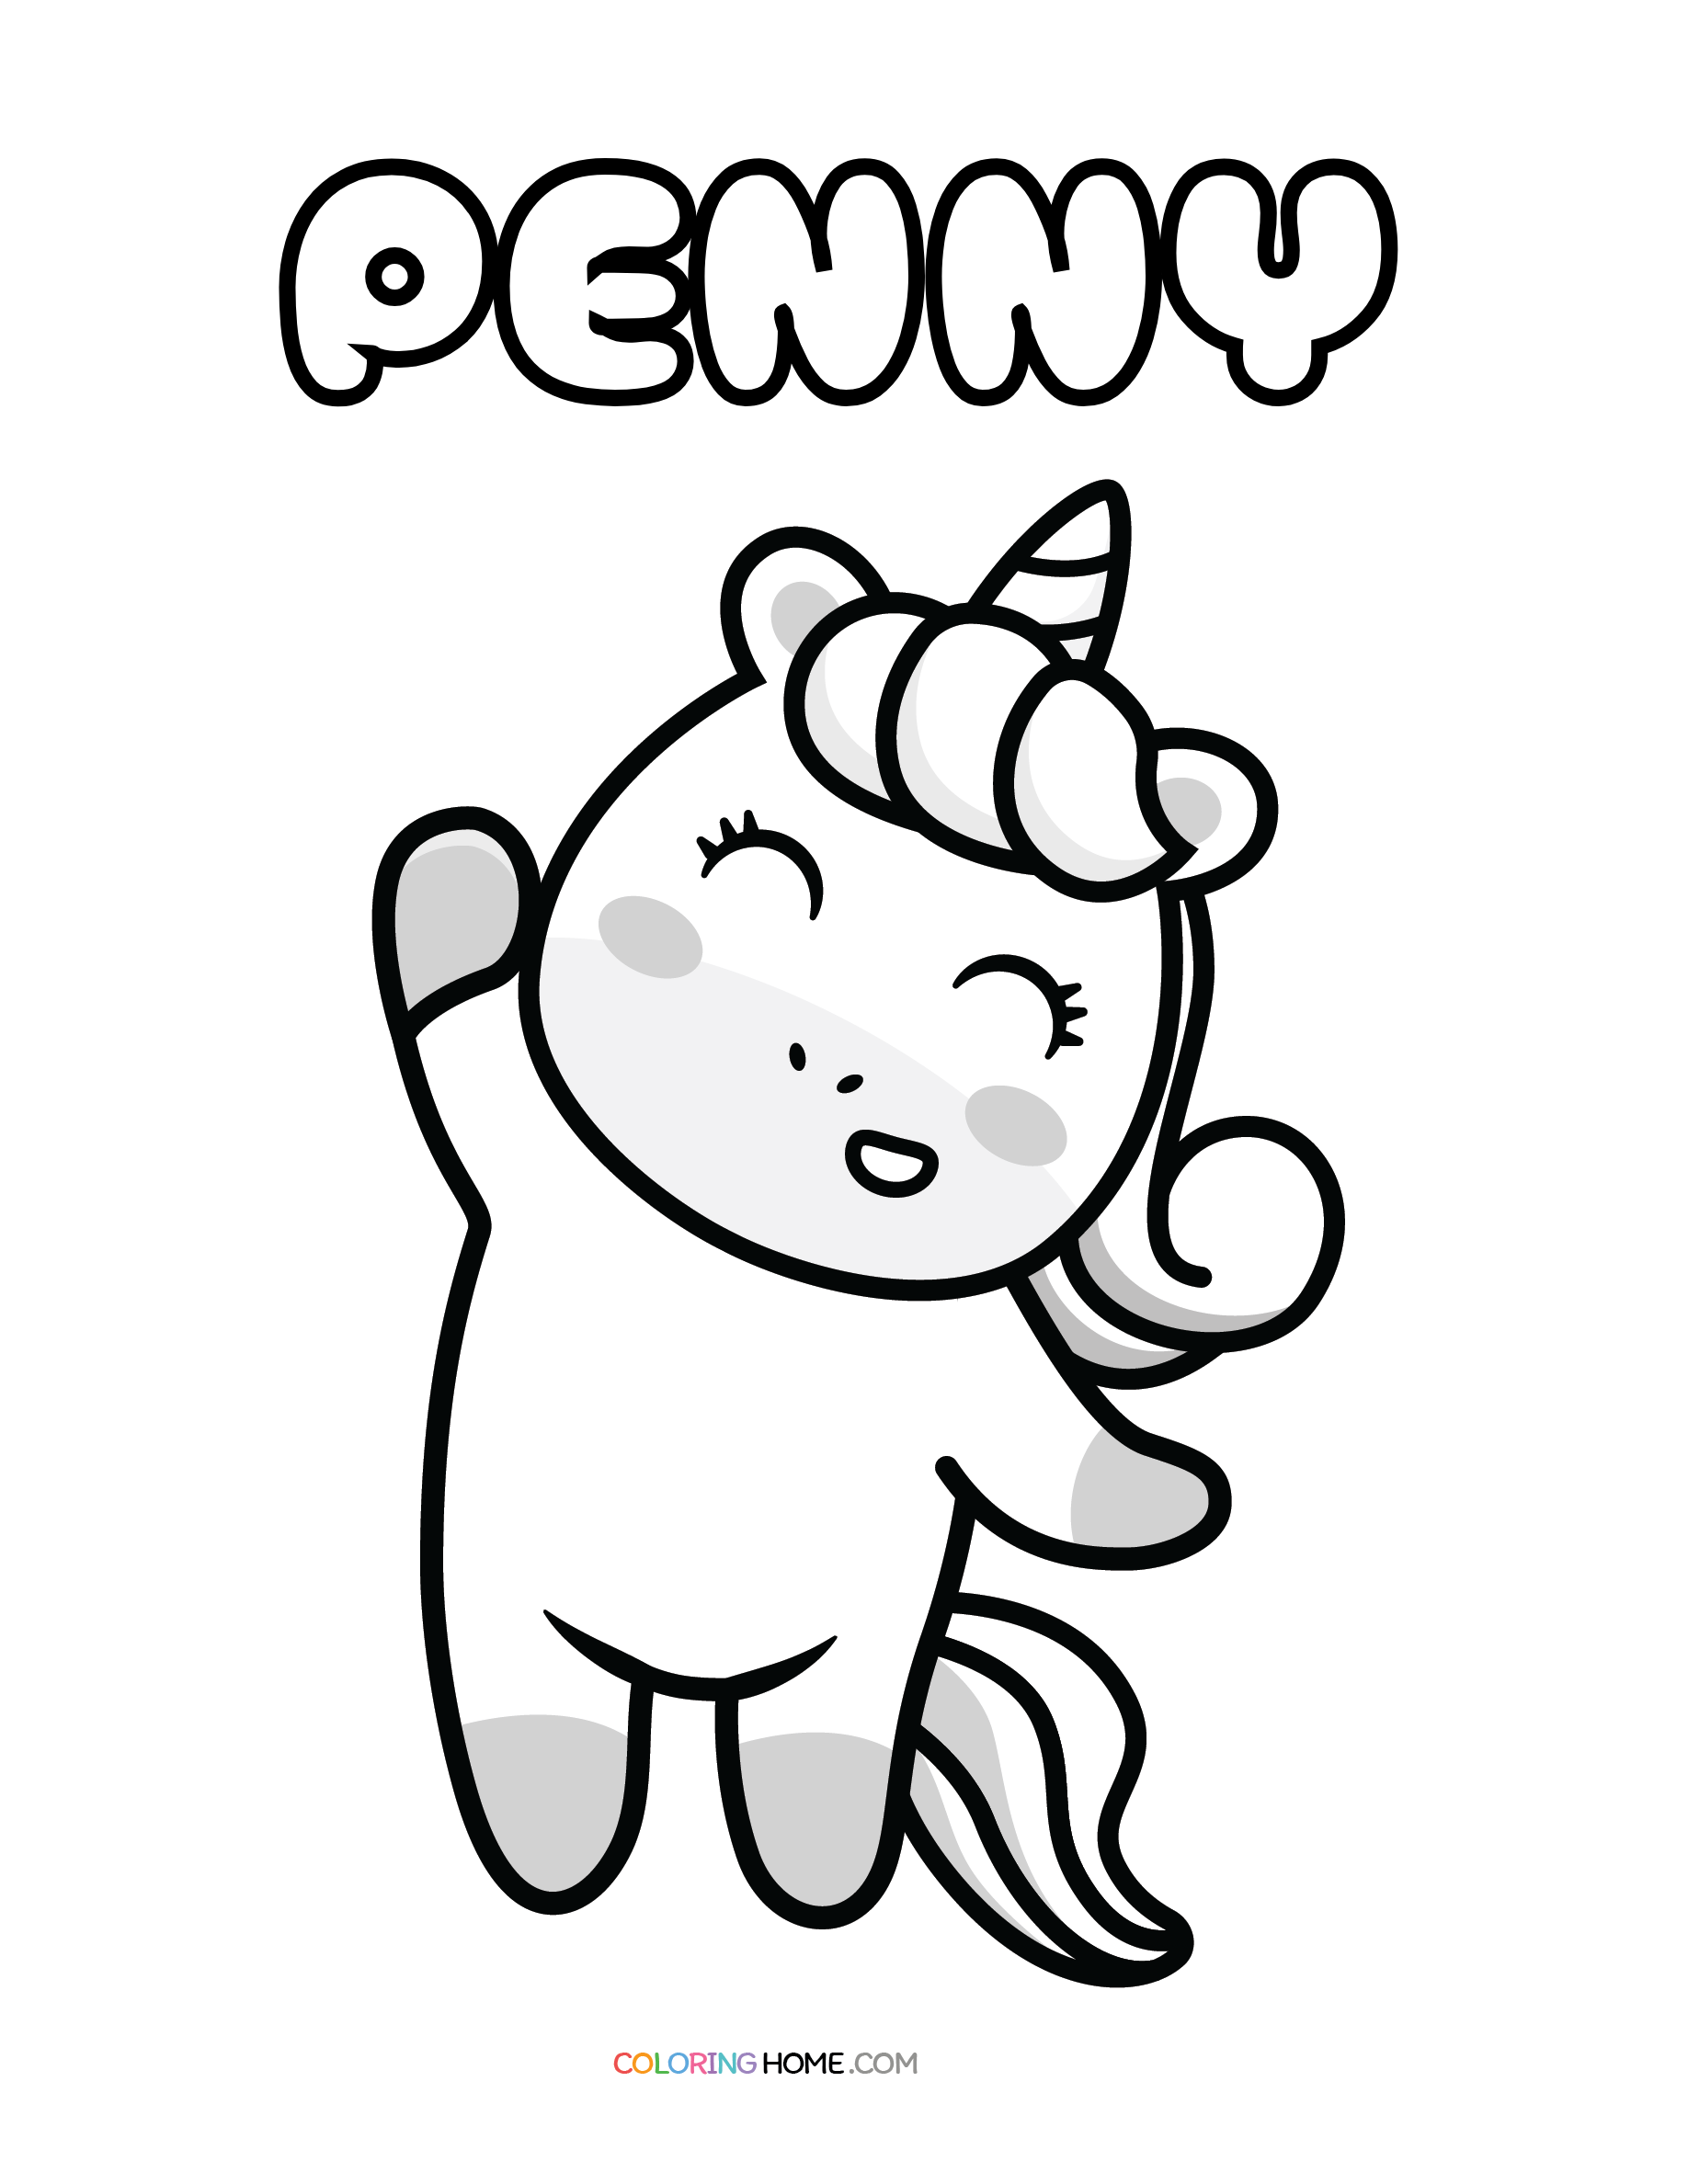 Penny unicorn coloring page